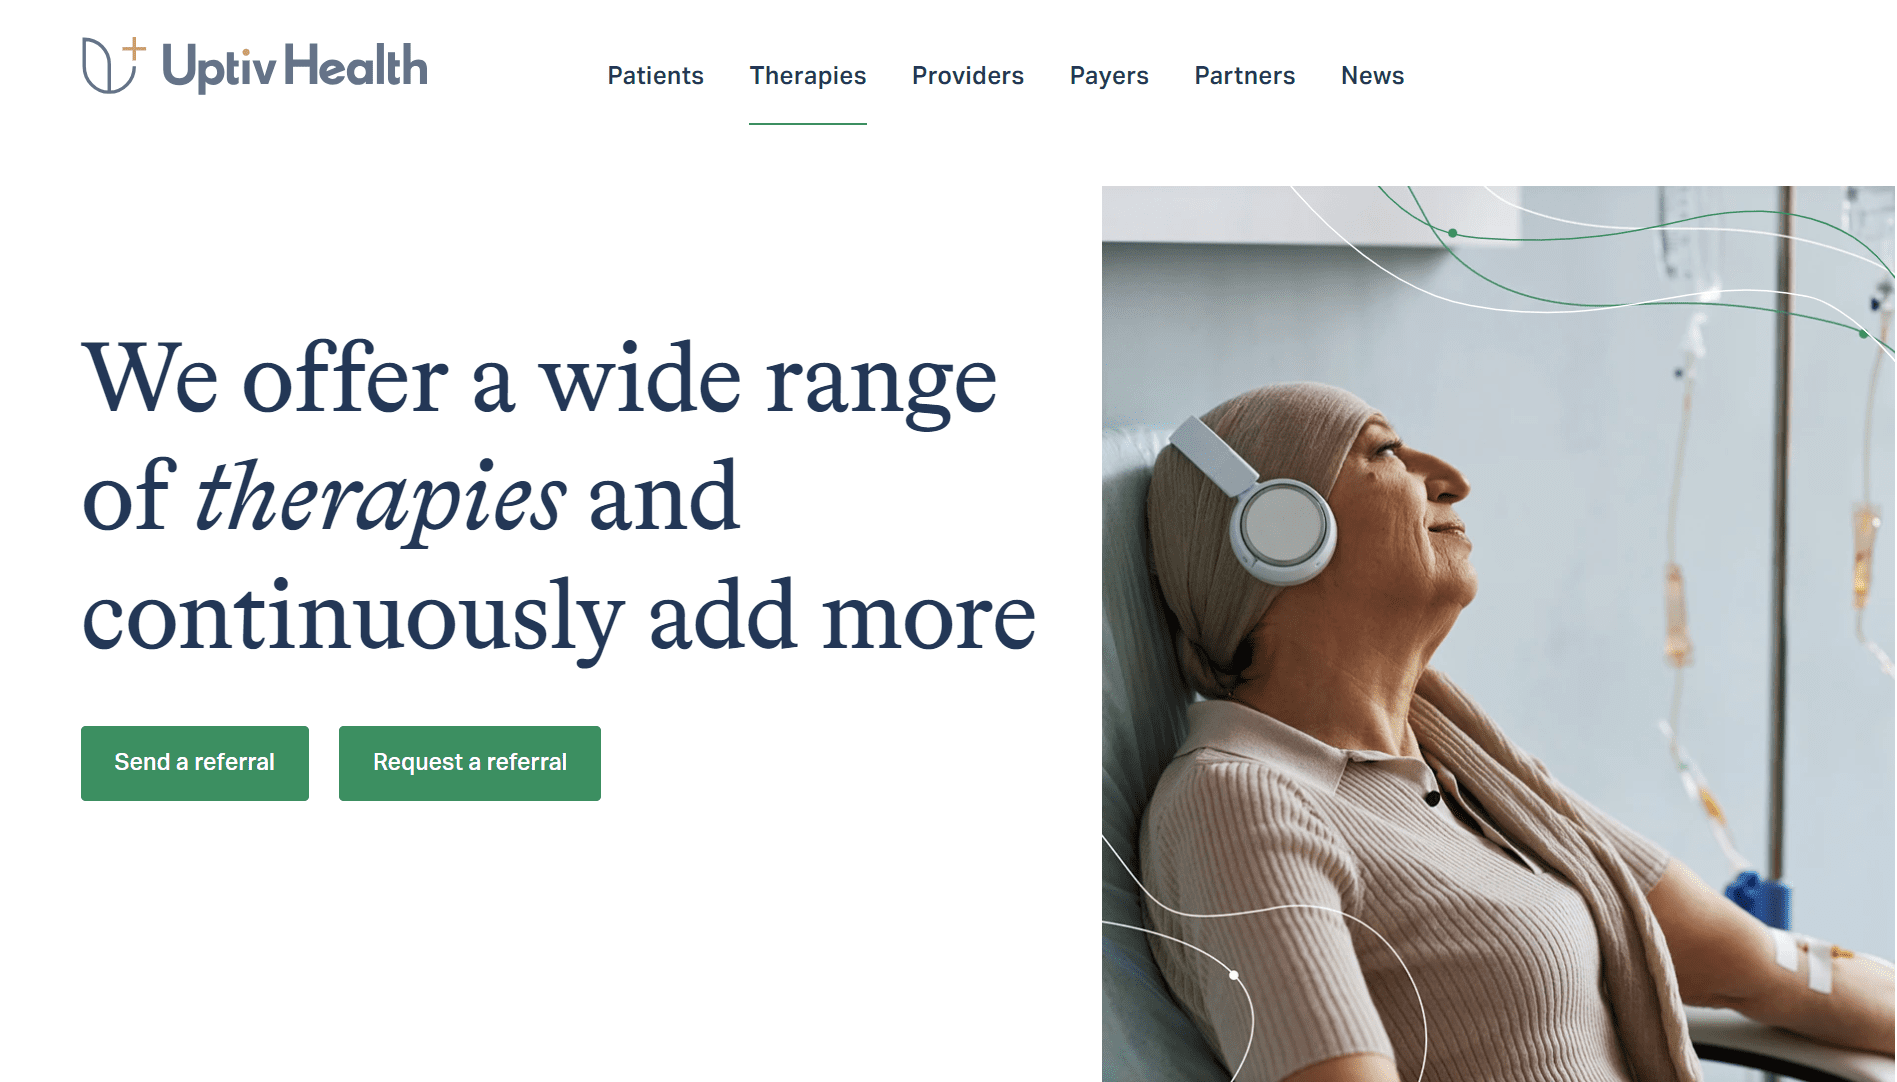 Uptiv Health Launches Hybrid Infusion Care Experience with $7.5M